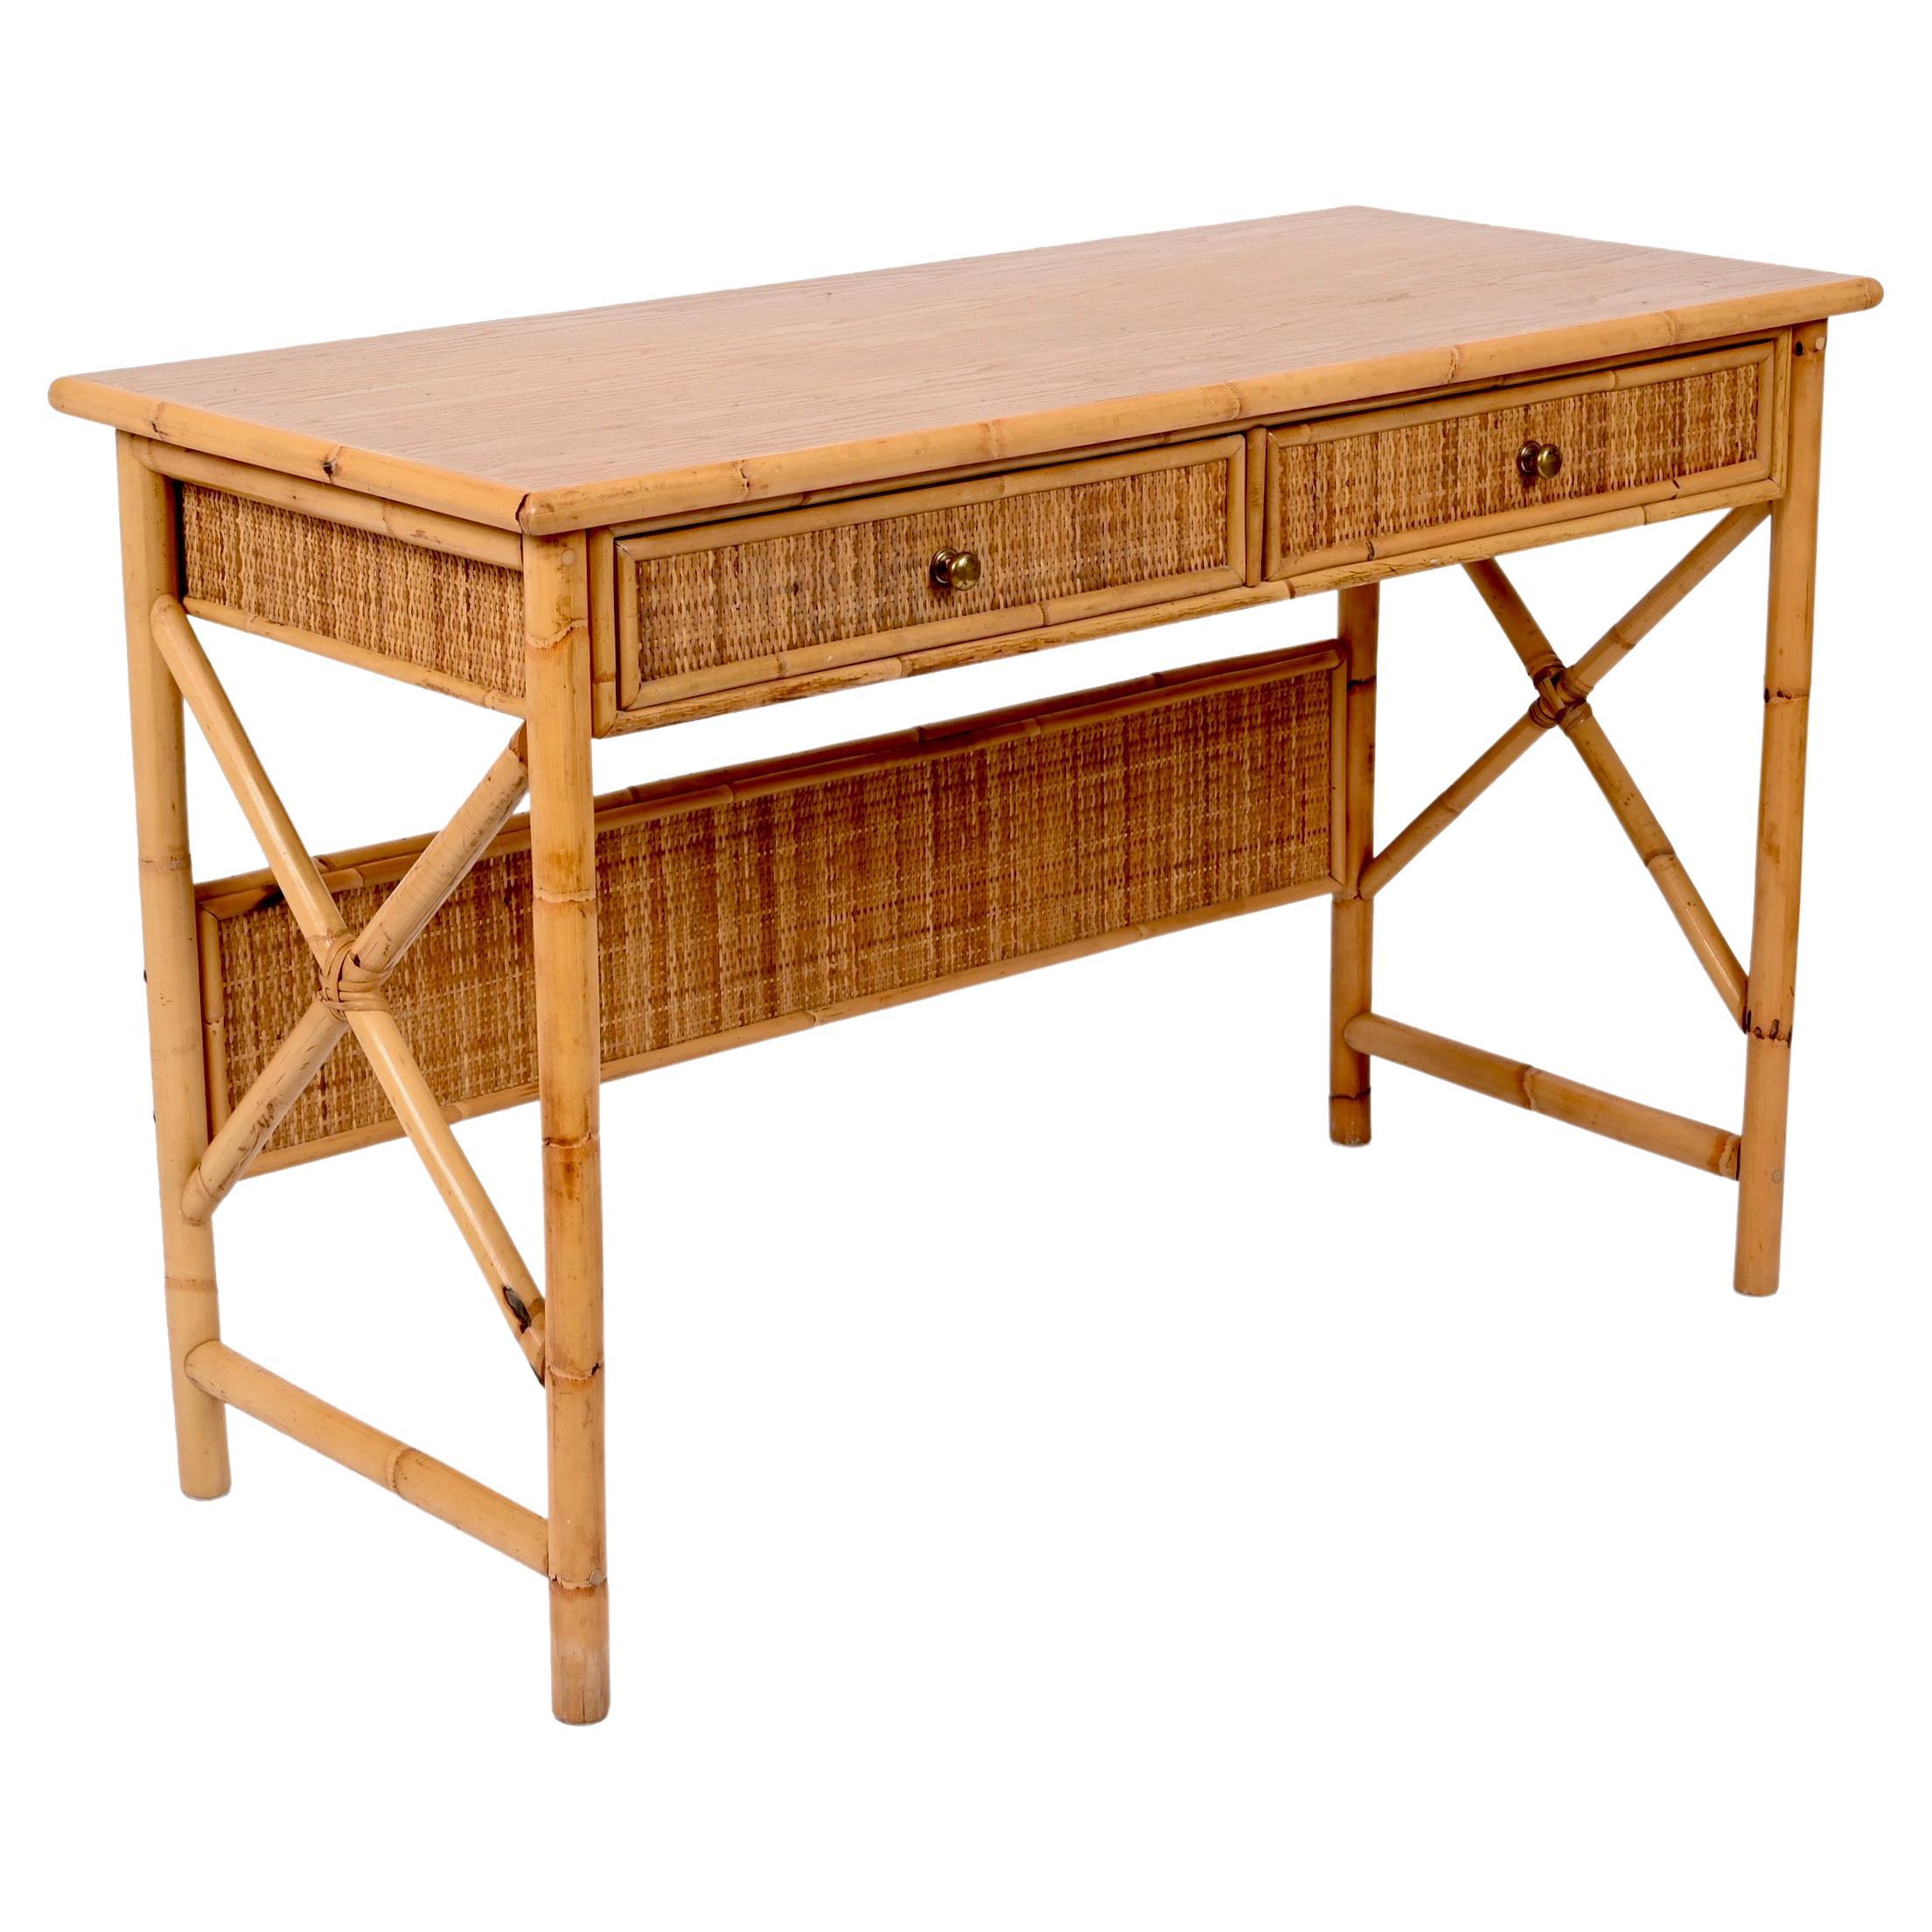 Midcentury Bamboo Cane, Ash Wood and Rattan Italian Desk with Drawers, 1980s